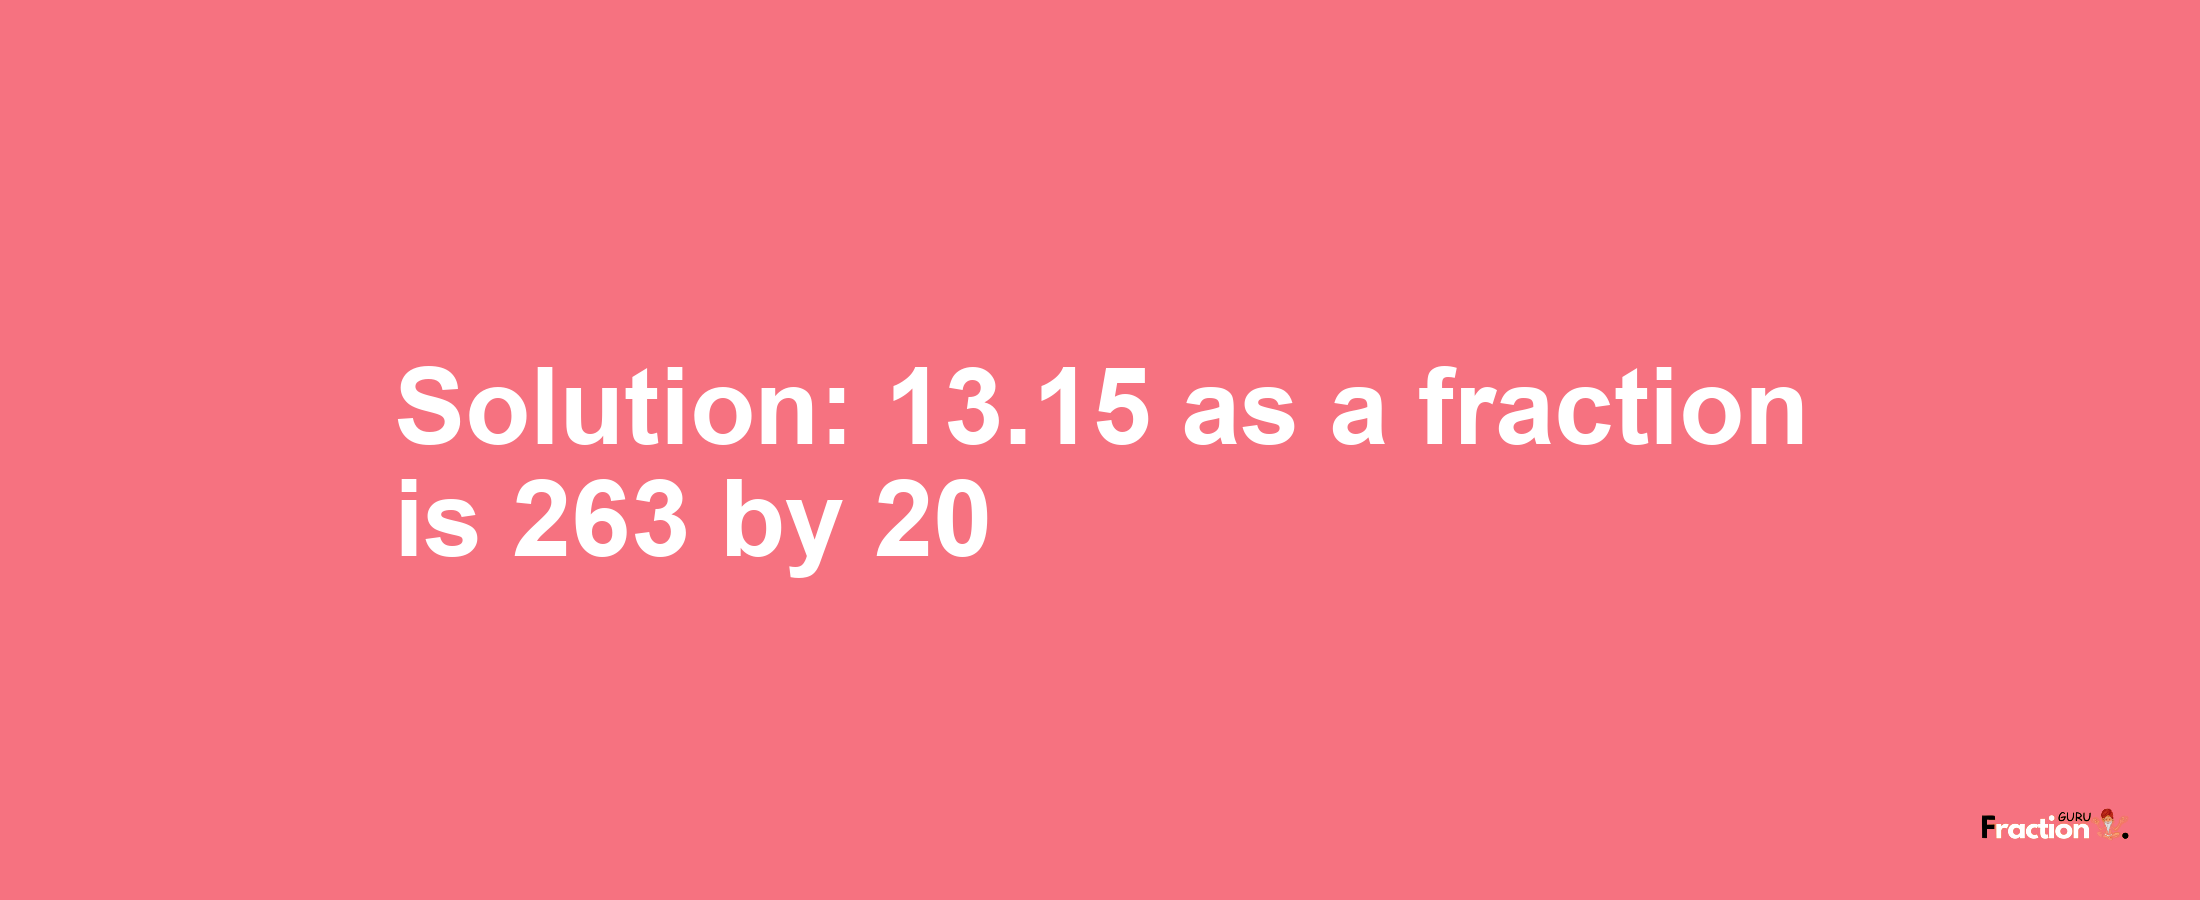 Solution:13.15 as a fraction is 263/20